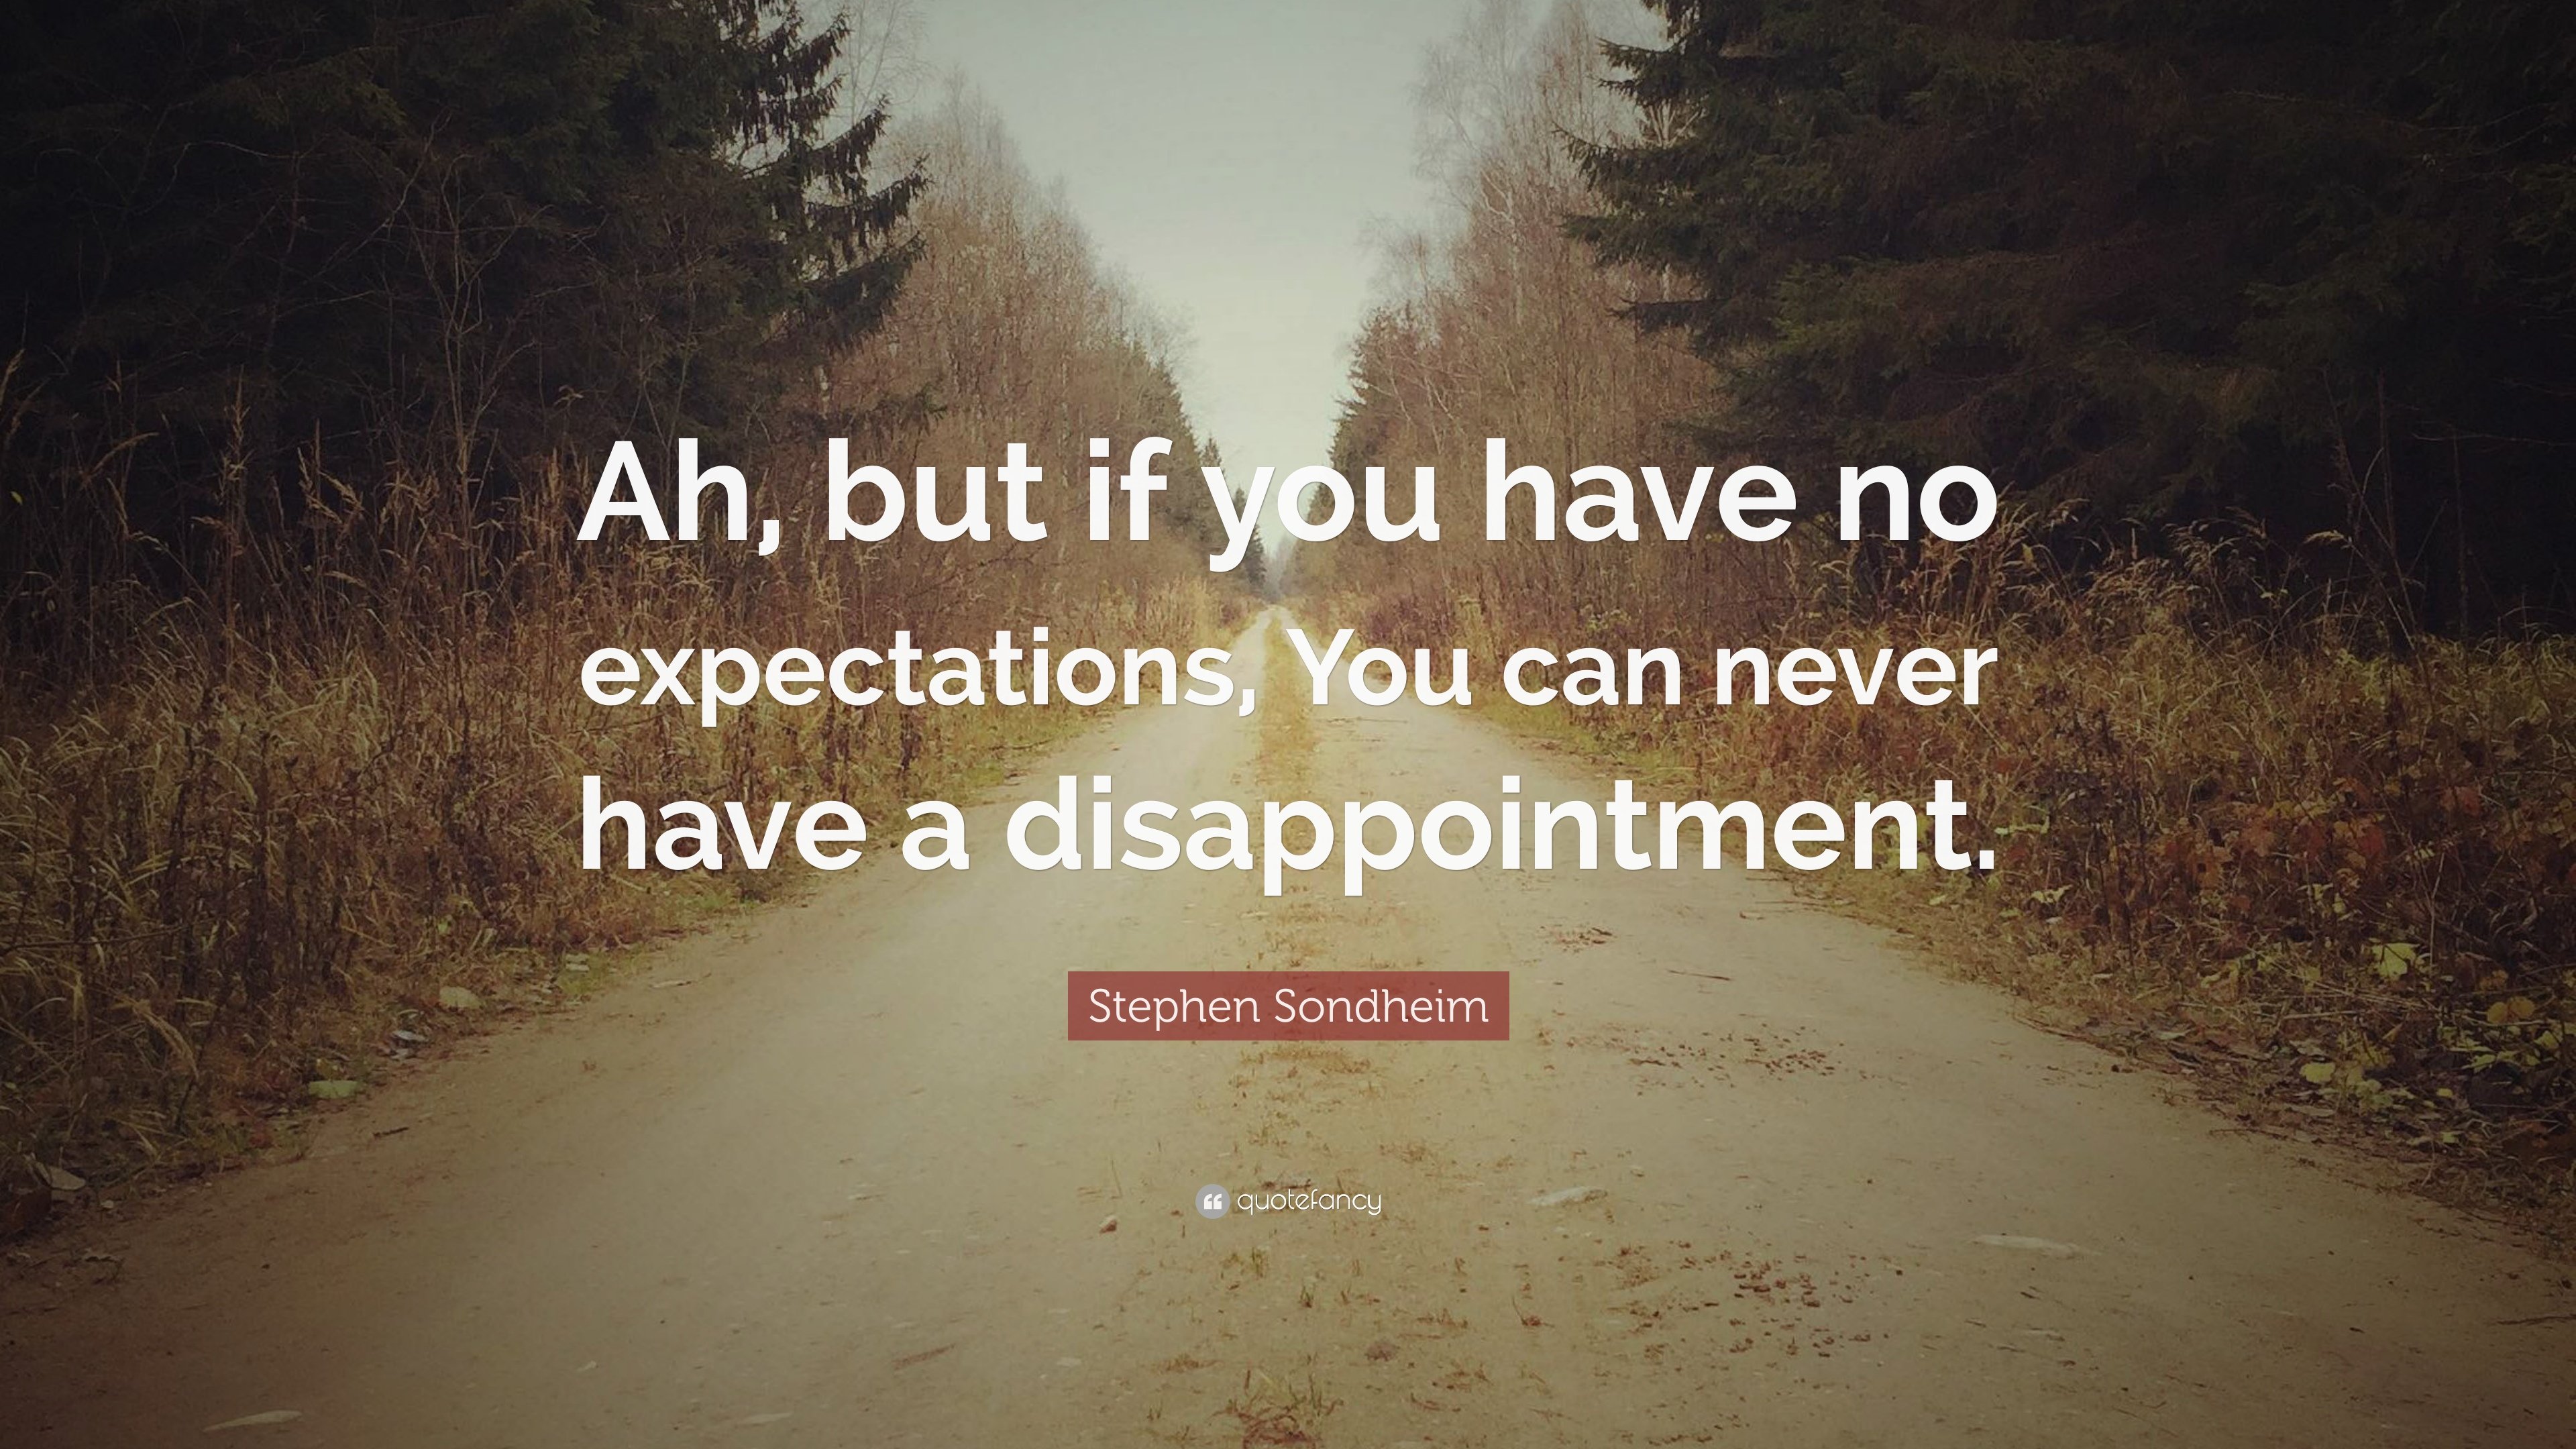 Stephen Sondheim Quote: “Ah, but if you have no expectations, You can never have a disappointment.” (7 wallpaper)